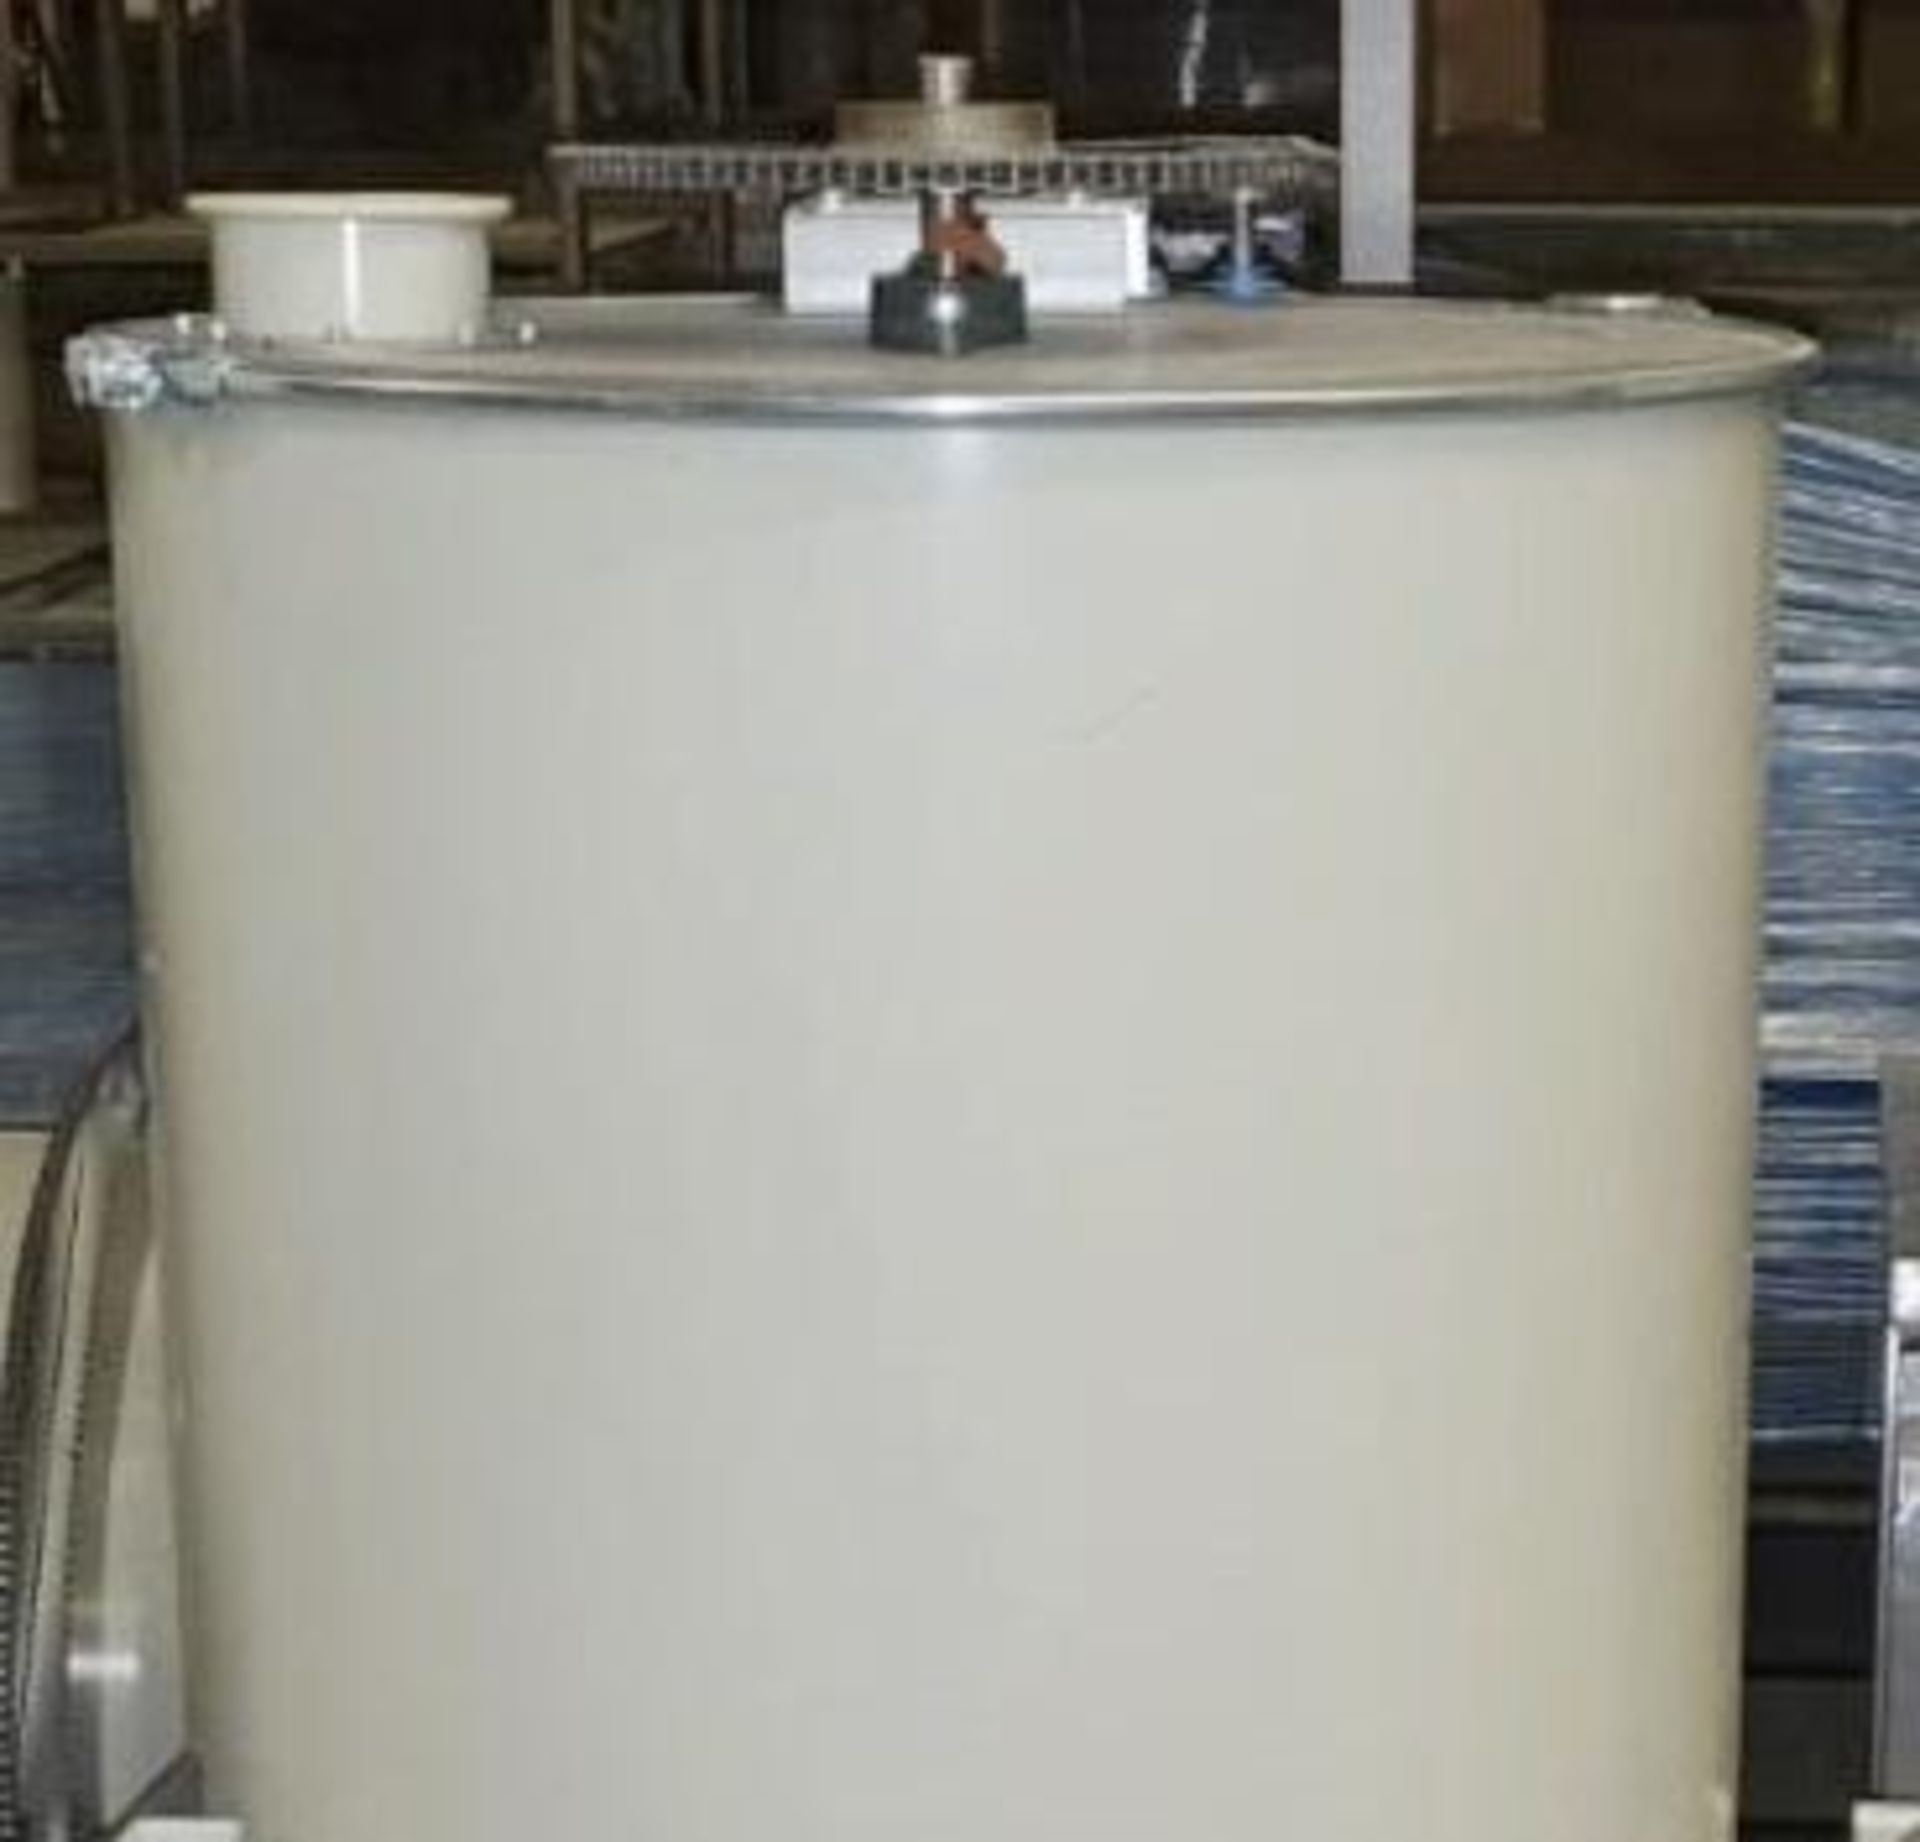 1 x Drum Mixer (600mm Diameter x 1000mm) Including 2 x Dosing Pumps And 1 x Powder Pump - Year Of Ma - Image 2 of 3